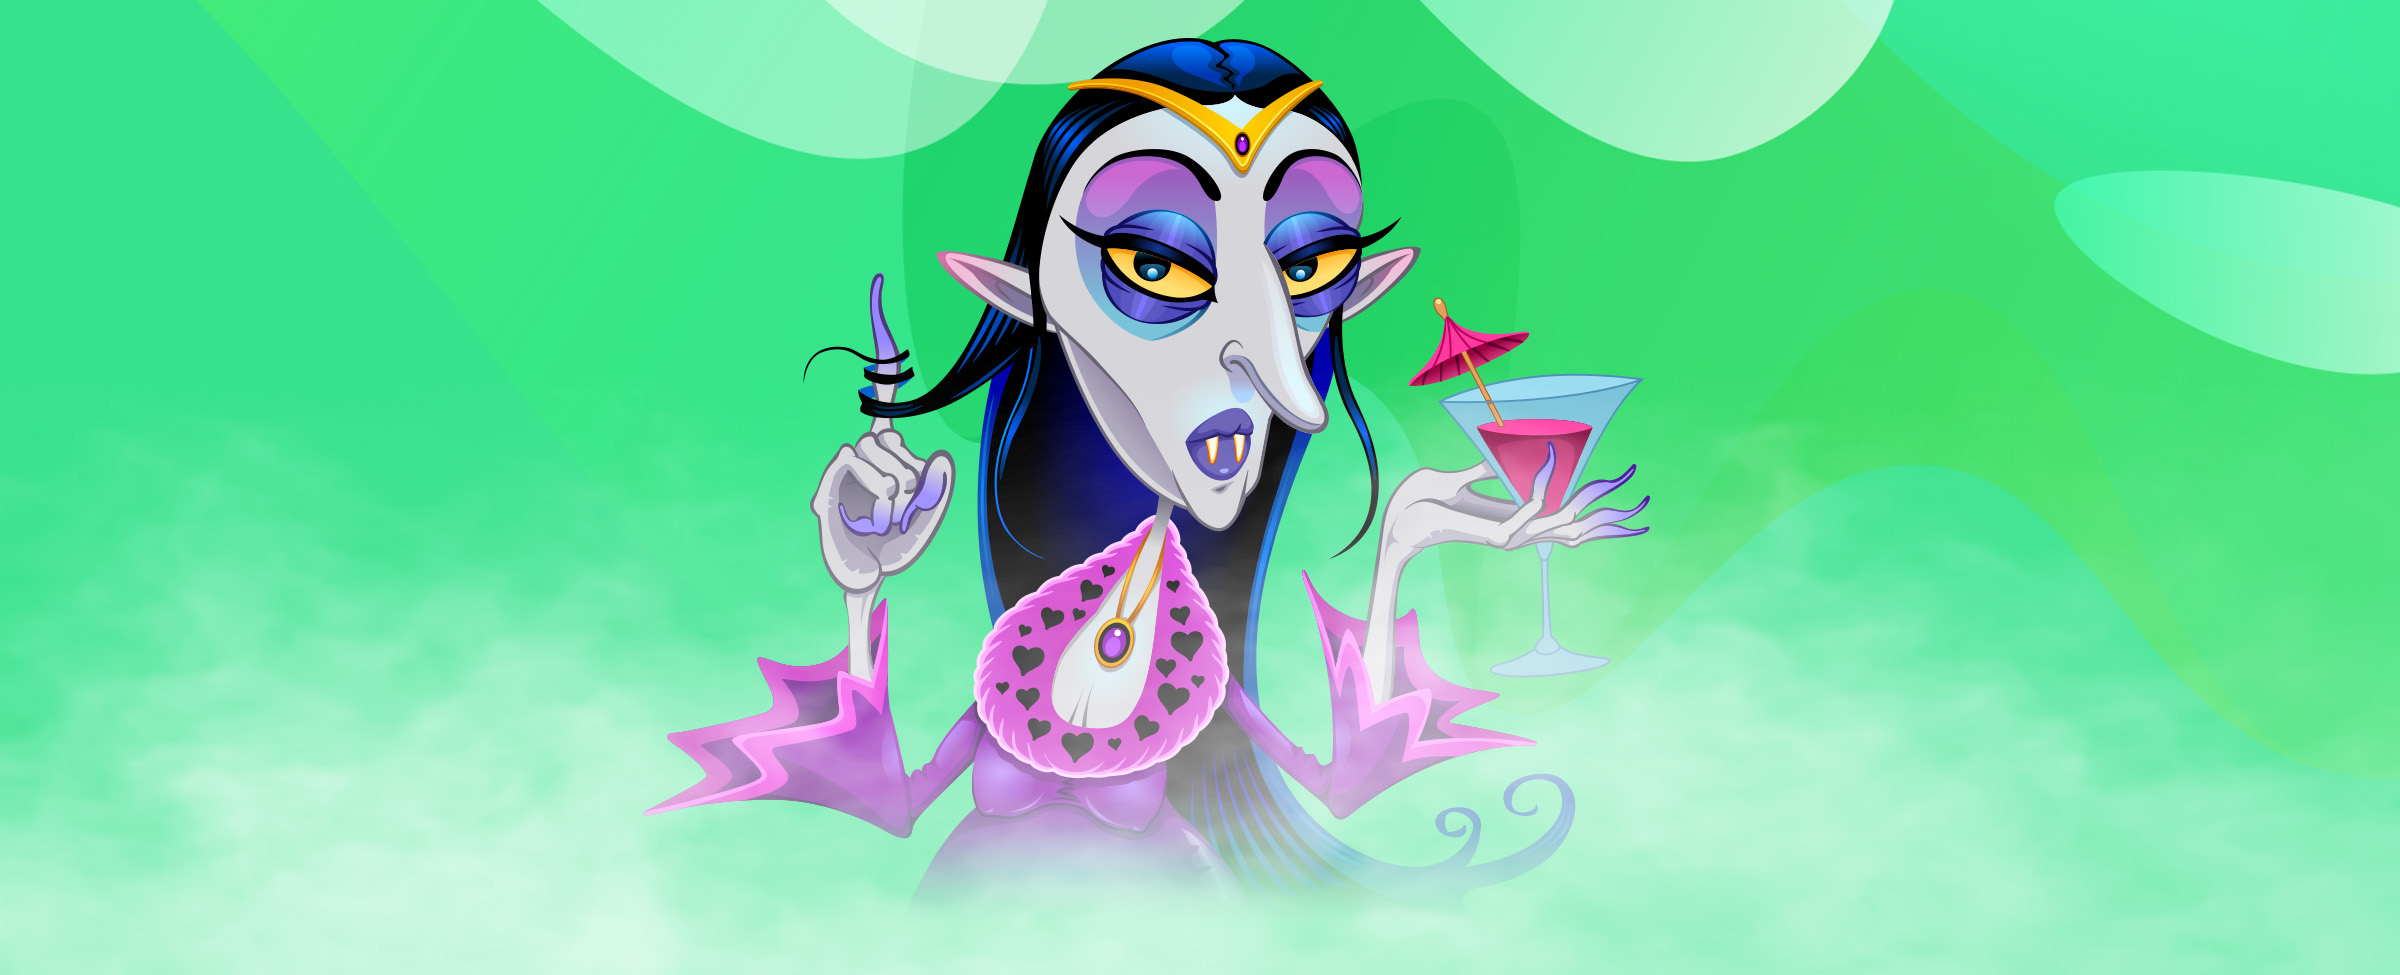 A female cartoon character resembling Morticia Addams from the Addams Family holding a cocktail in one hand and twirling her hair with the other